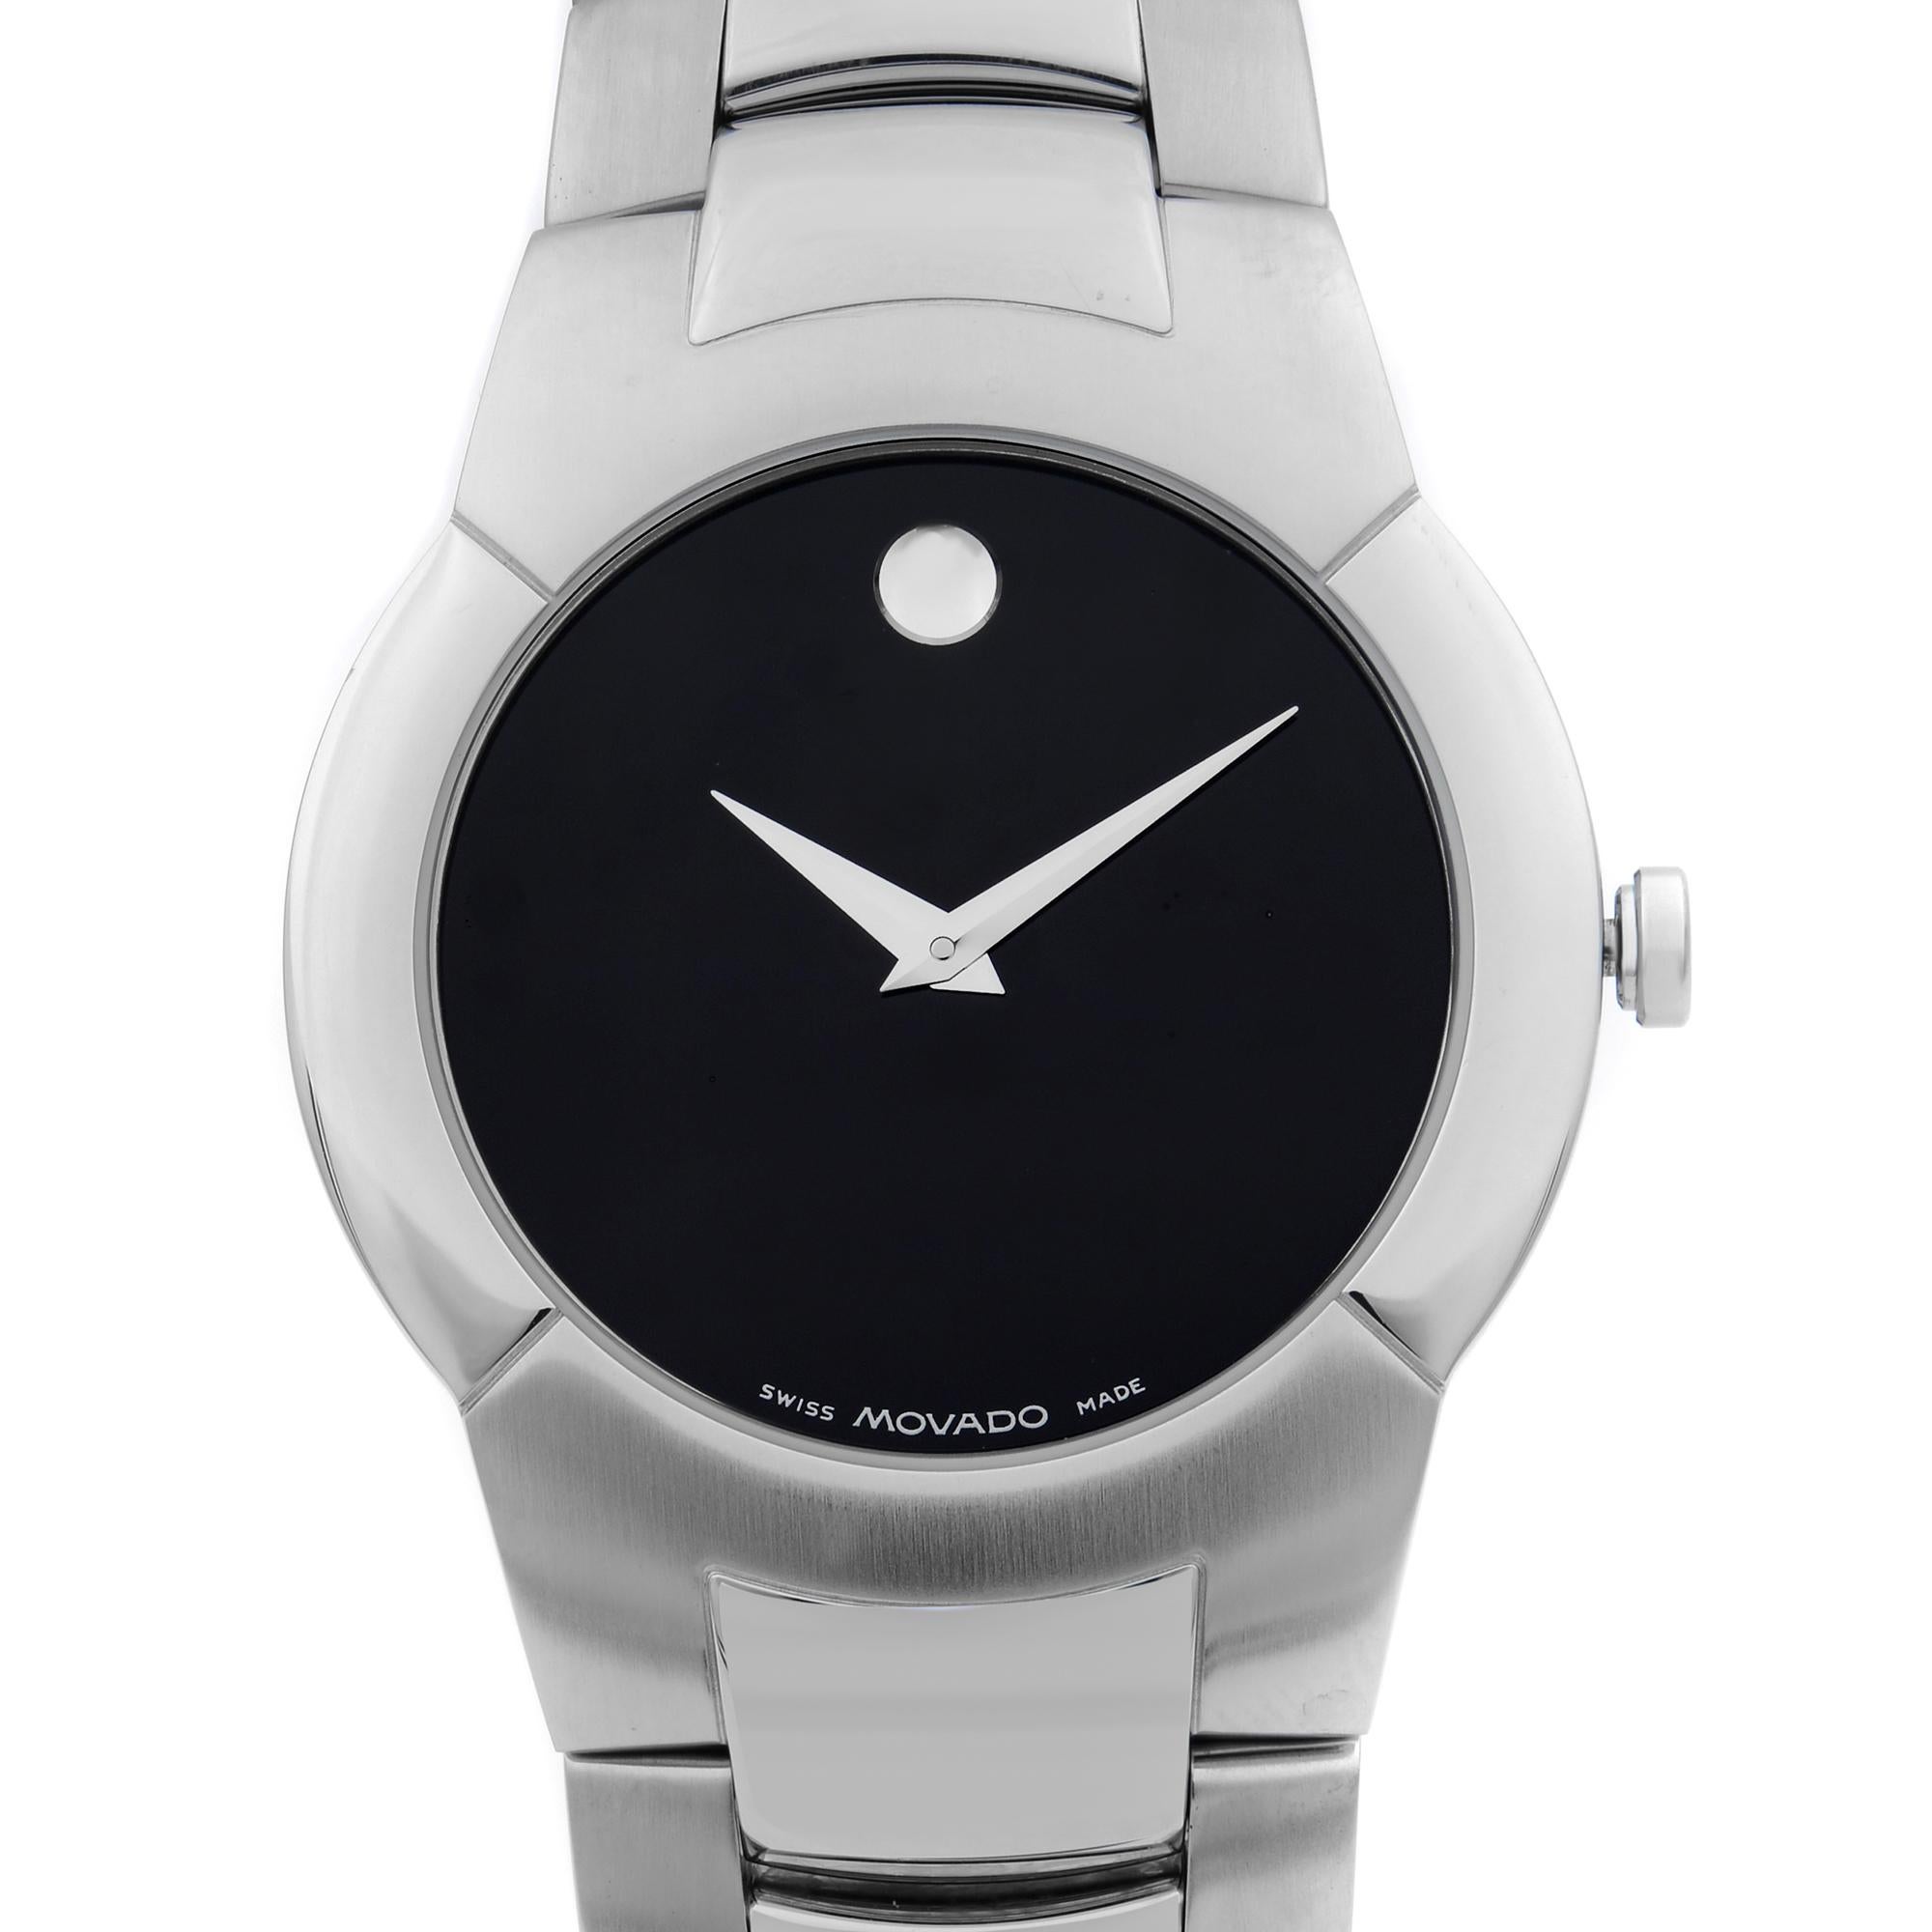 This display model Movado Monto 84 G1 1897 is a beautiful men's timepiece that is powered by quartz (battery) movement which is cased in a stainless steel case. It has a round shape face, no features dial and has hand unspecified style markers. Case